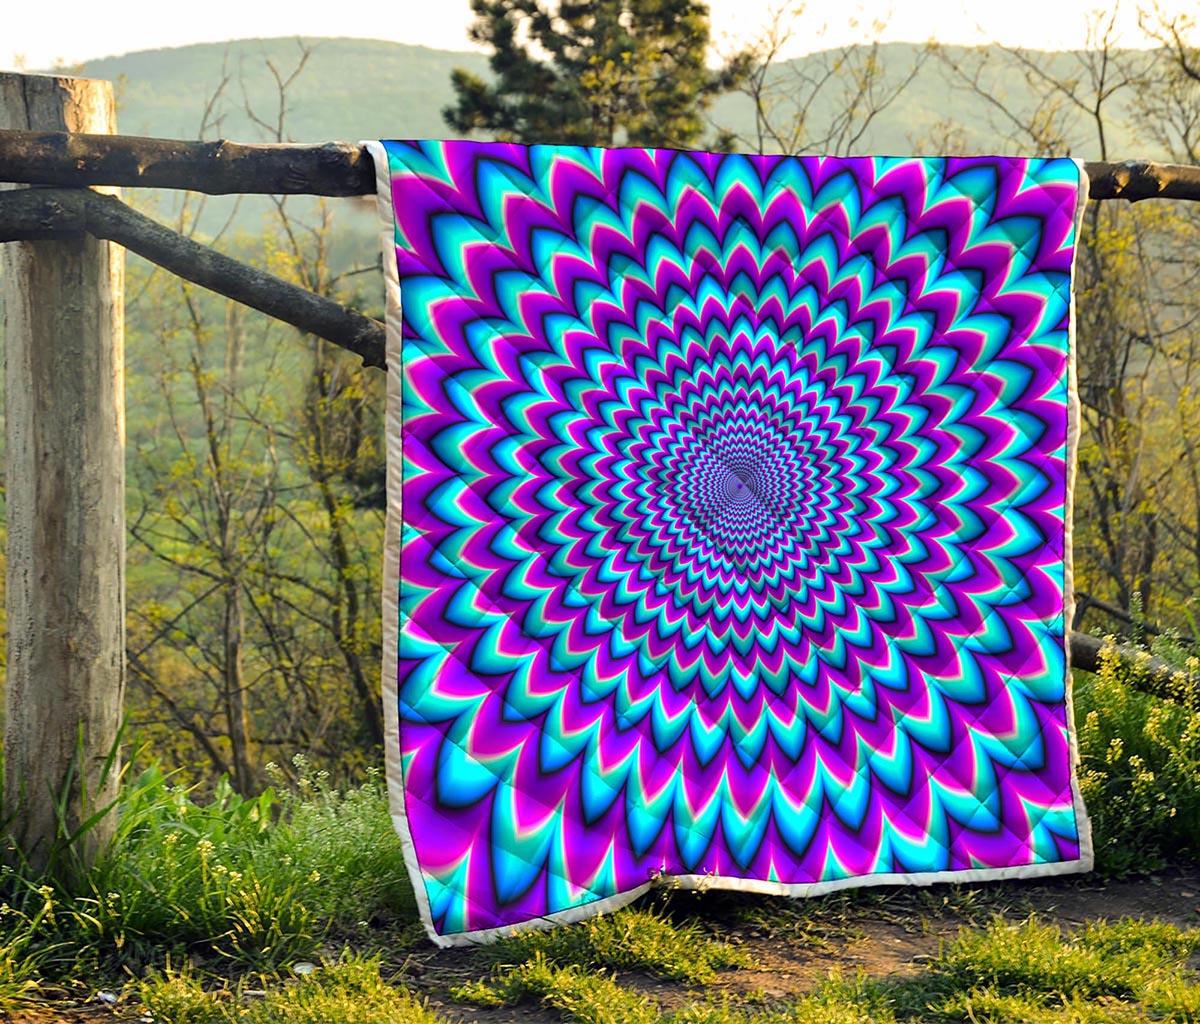 Blue Expansion Moving Optical Illusion Quilt